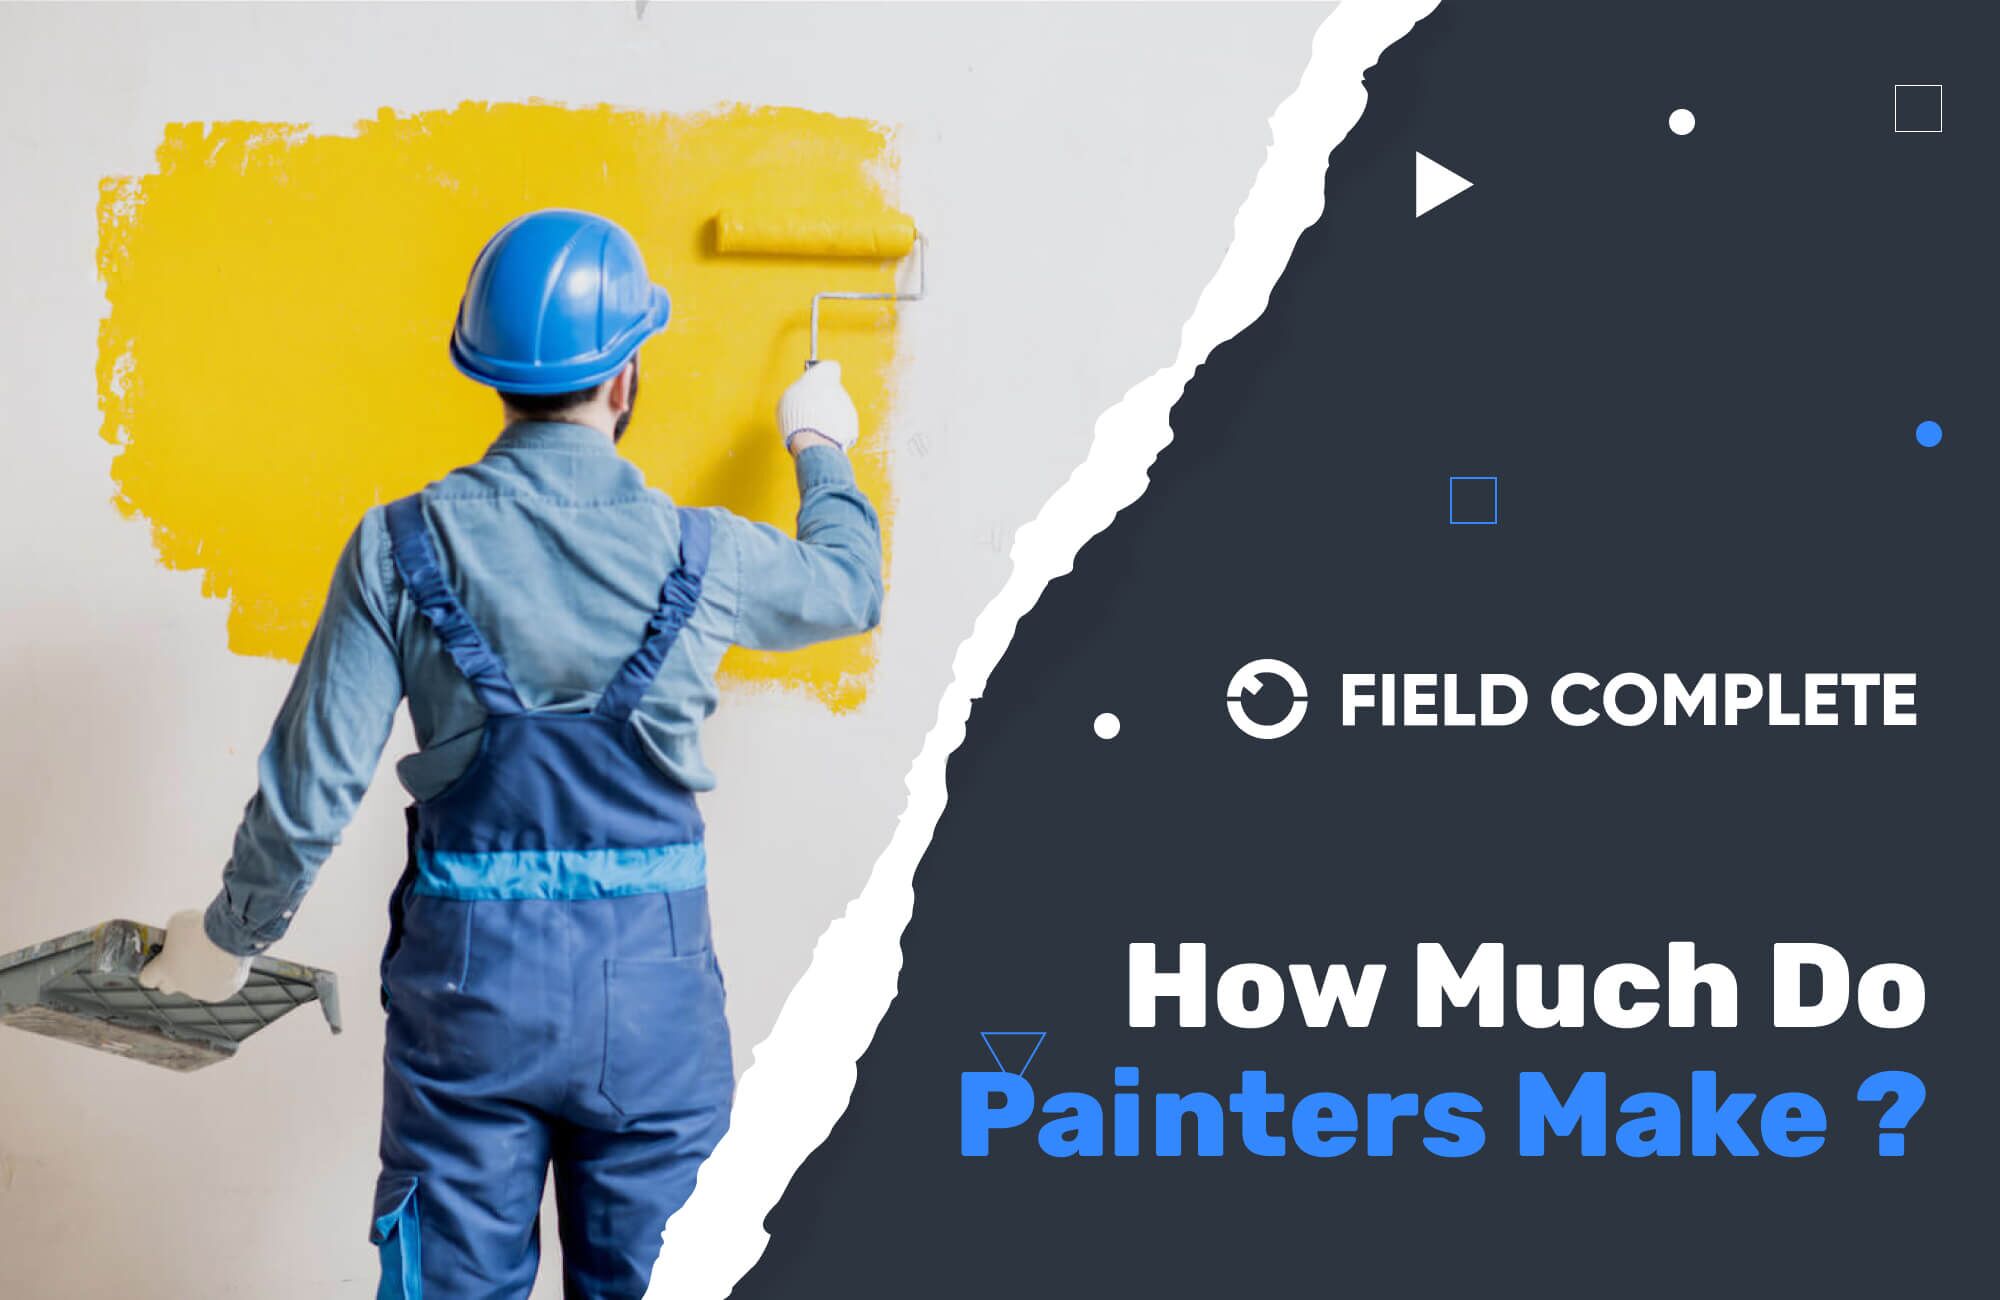 How Much Do Painters Make?